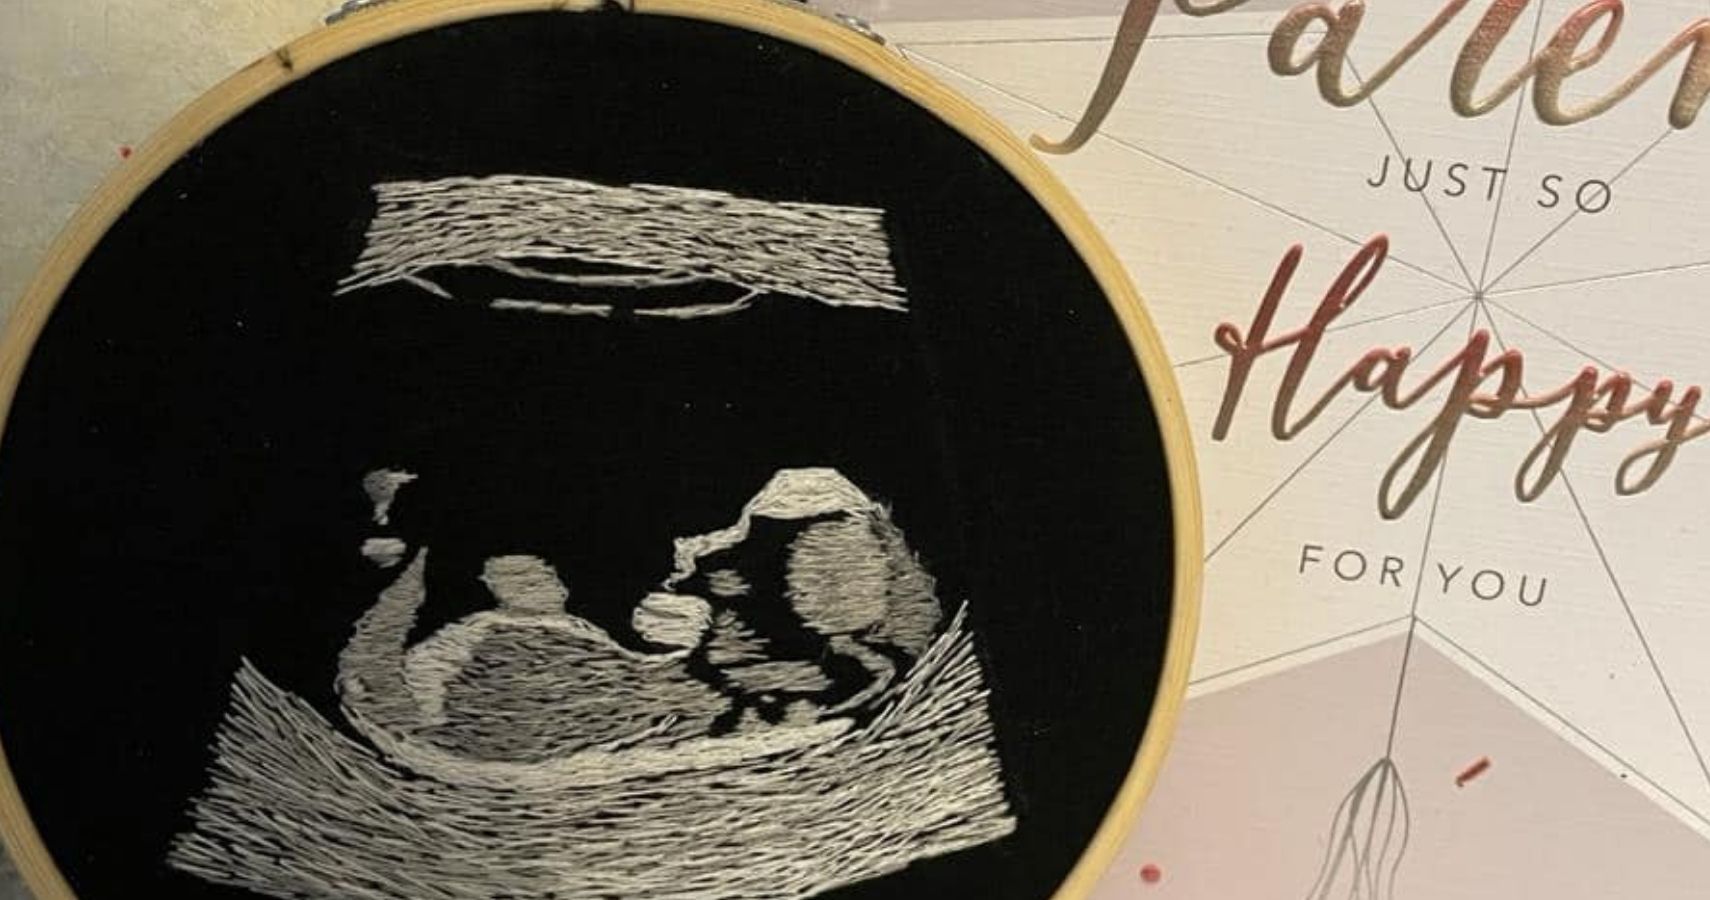 Nathan Edge embroidered ultra scan allows blind dad to see baby